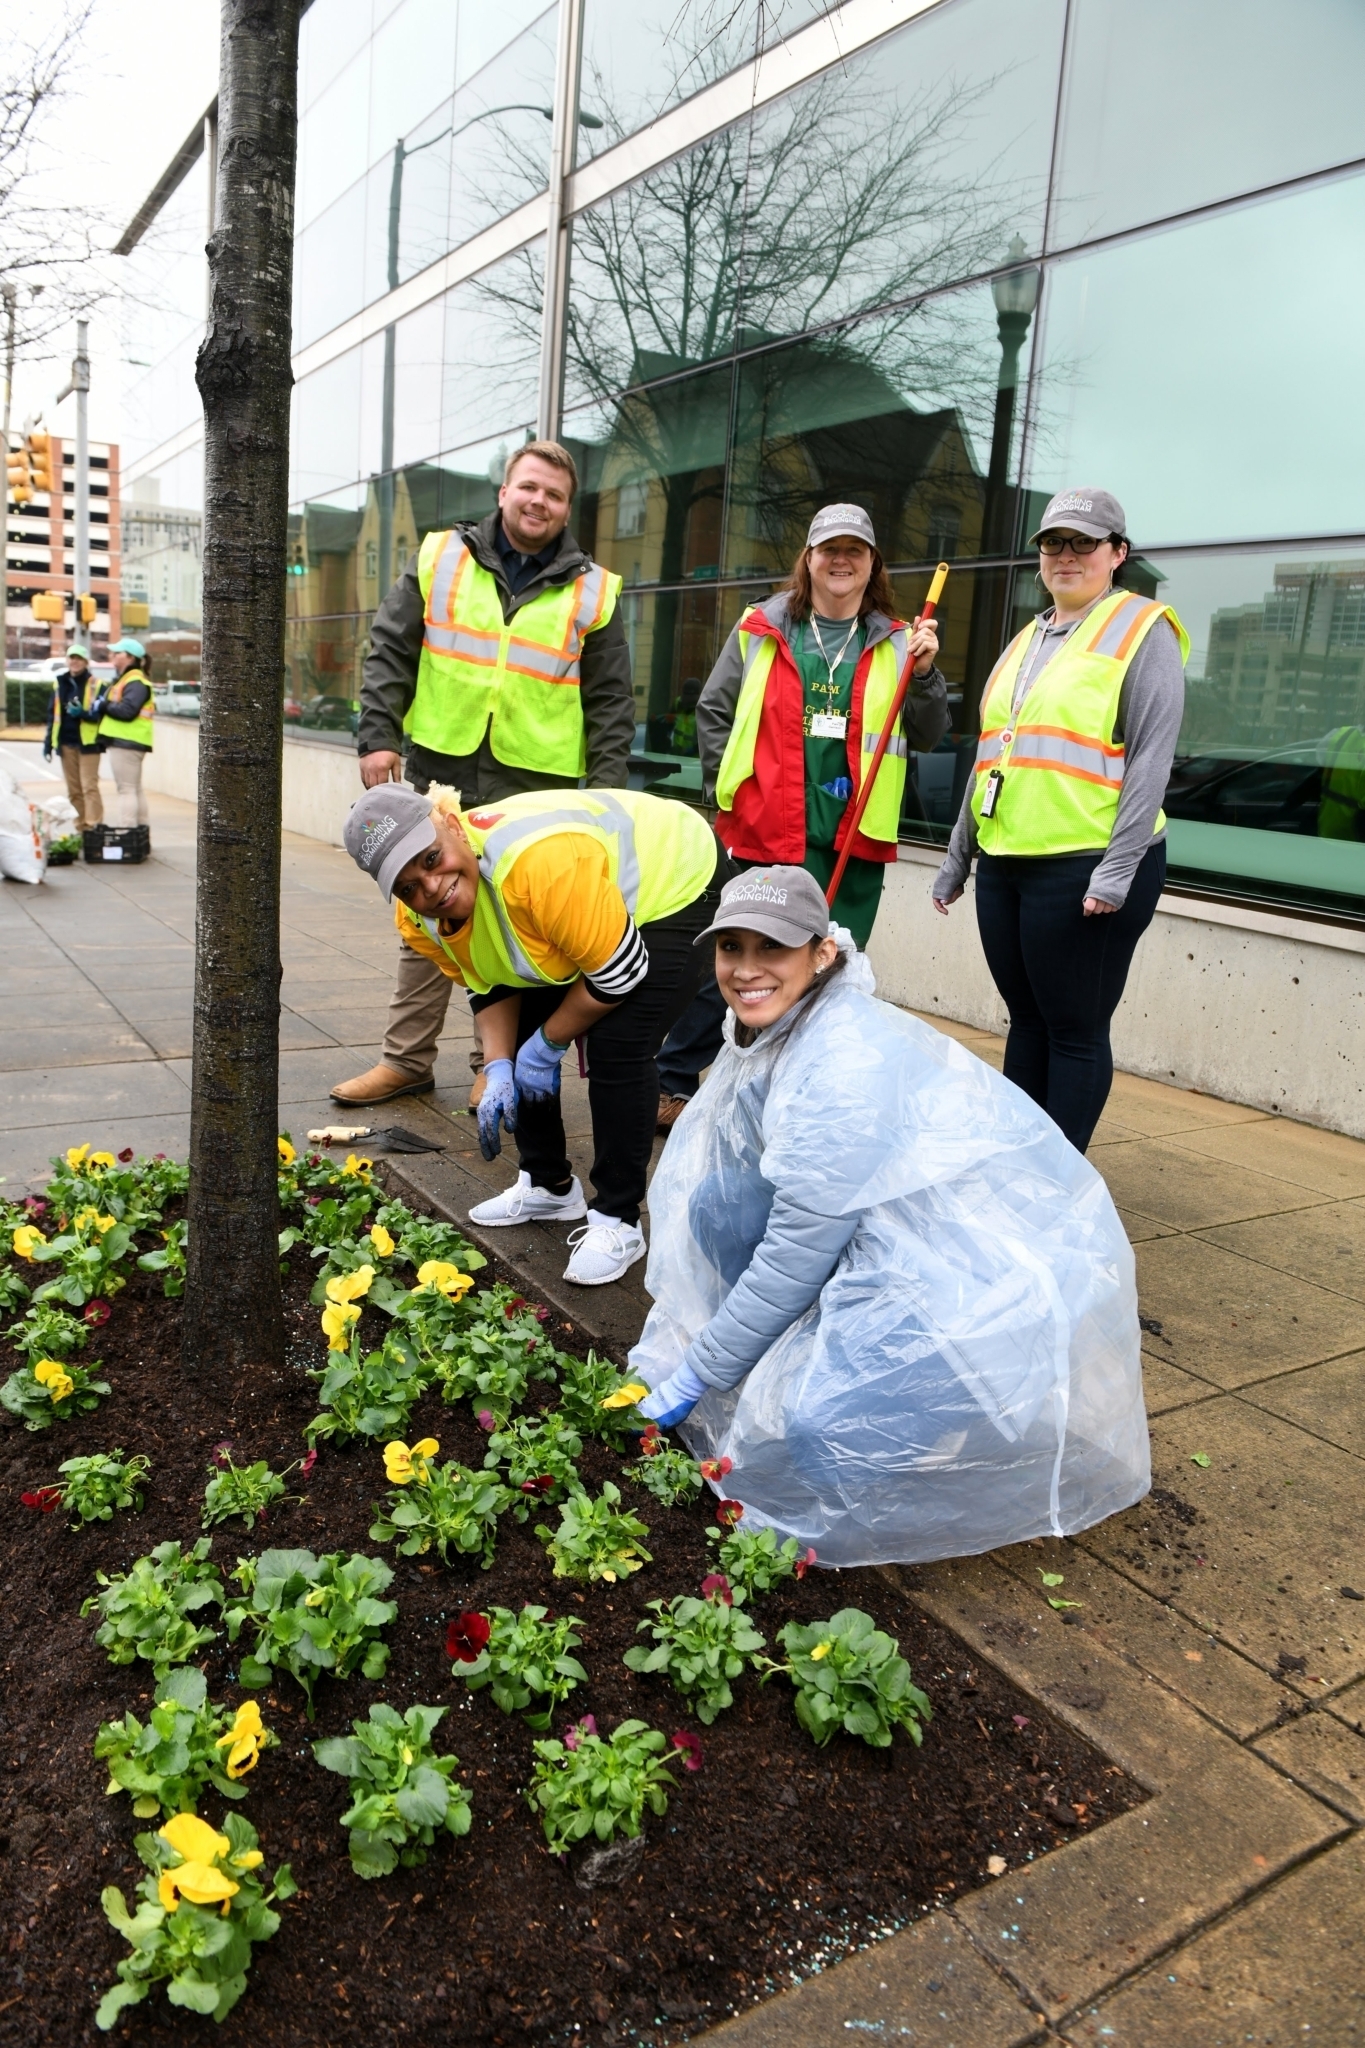 SDM 4321rs11 Blooming Birmingham: Planting 5000 flowers around Children's of Alabama and Parkside District